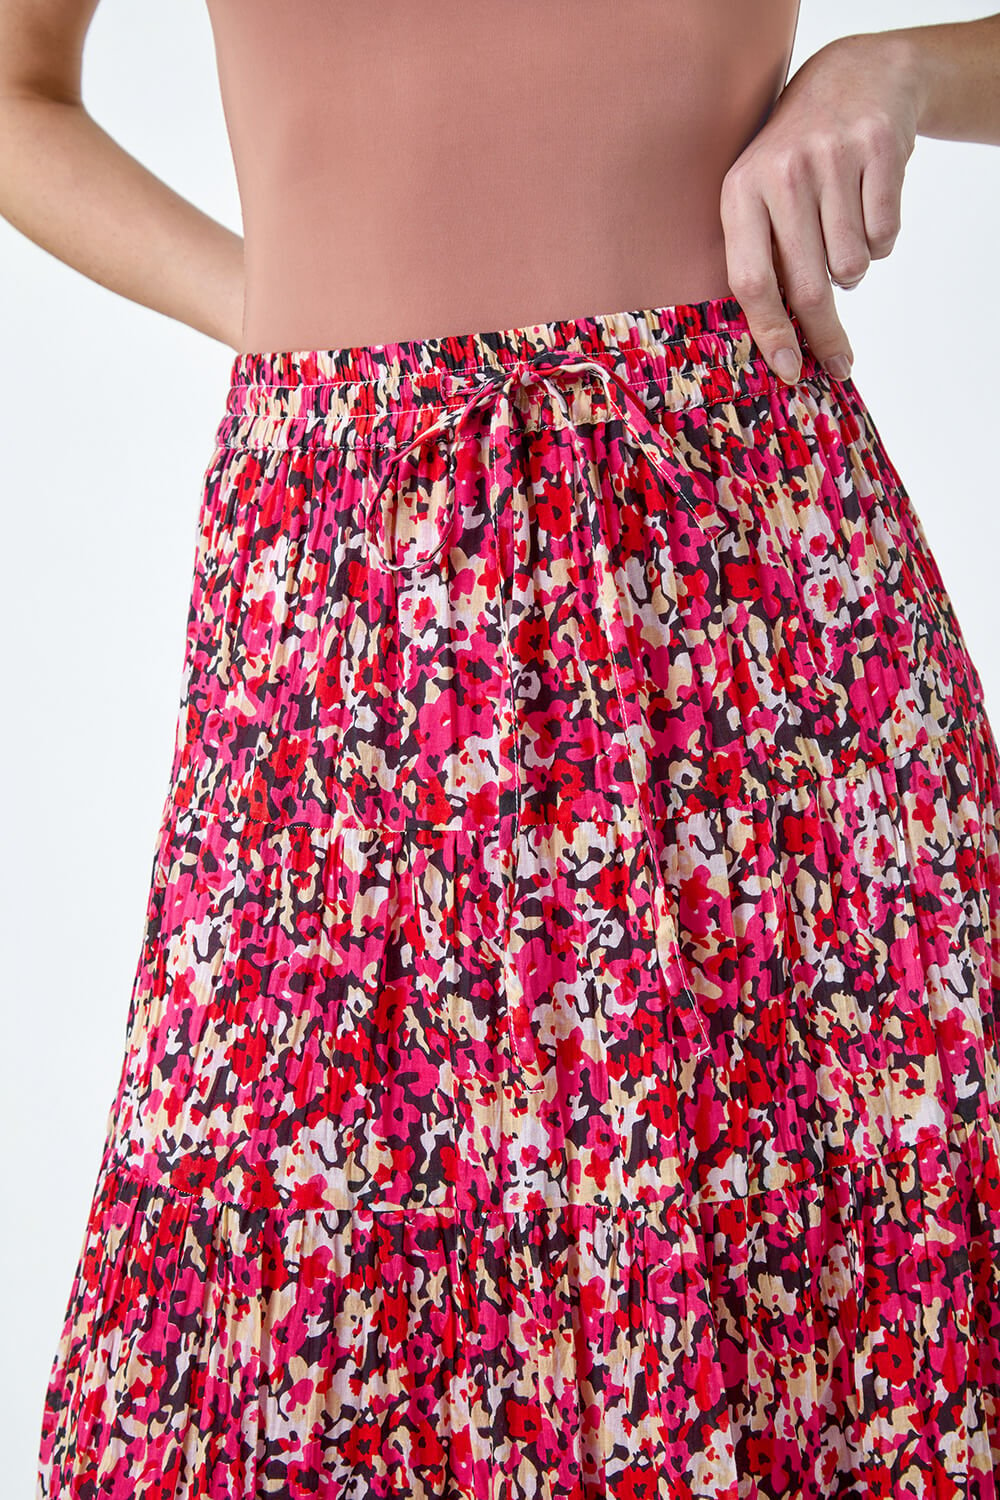 PINK Floral Crinkle Cotton Tiered Maxi Skirt, Image 5 of 5